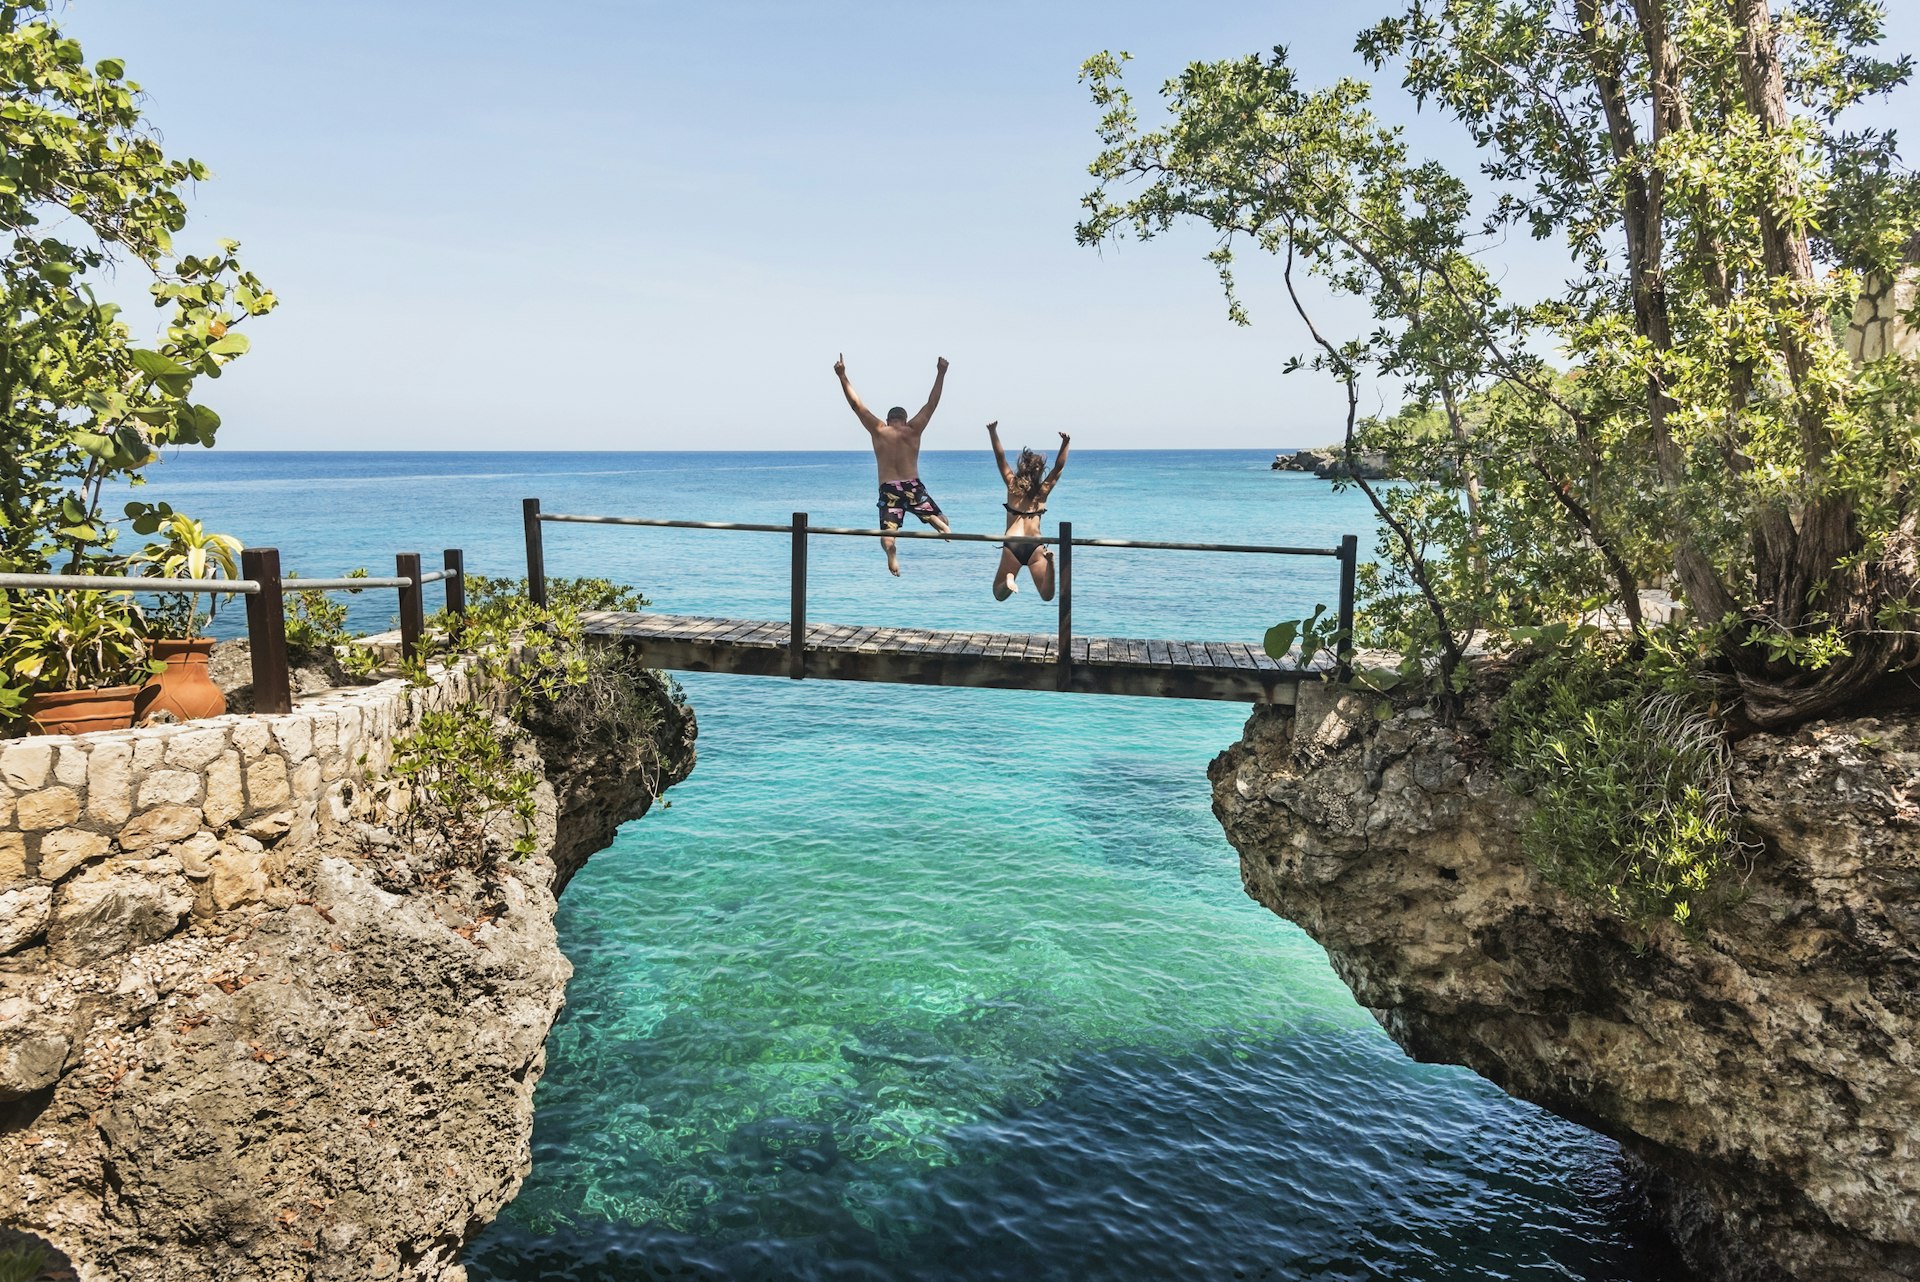 Two people in swimwear jump off a footbridge into the turquoise ocean